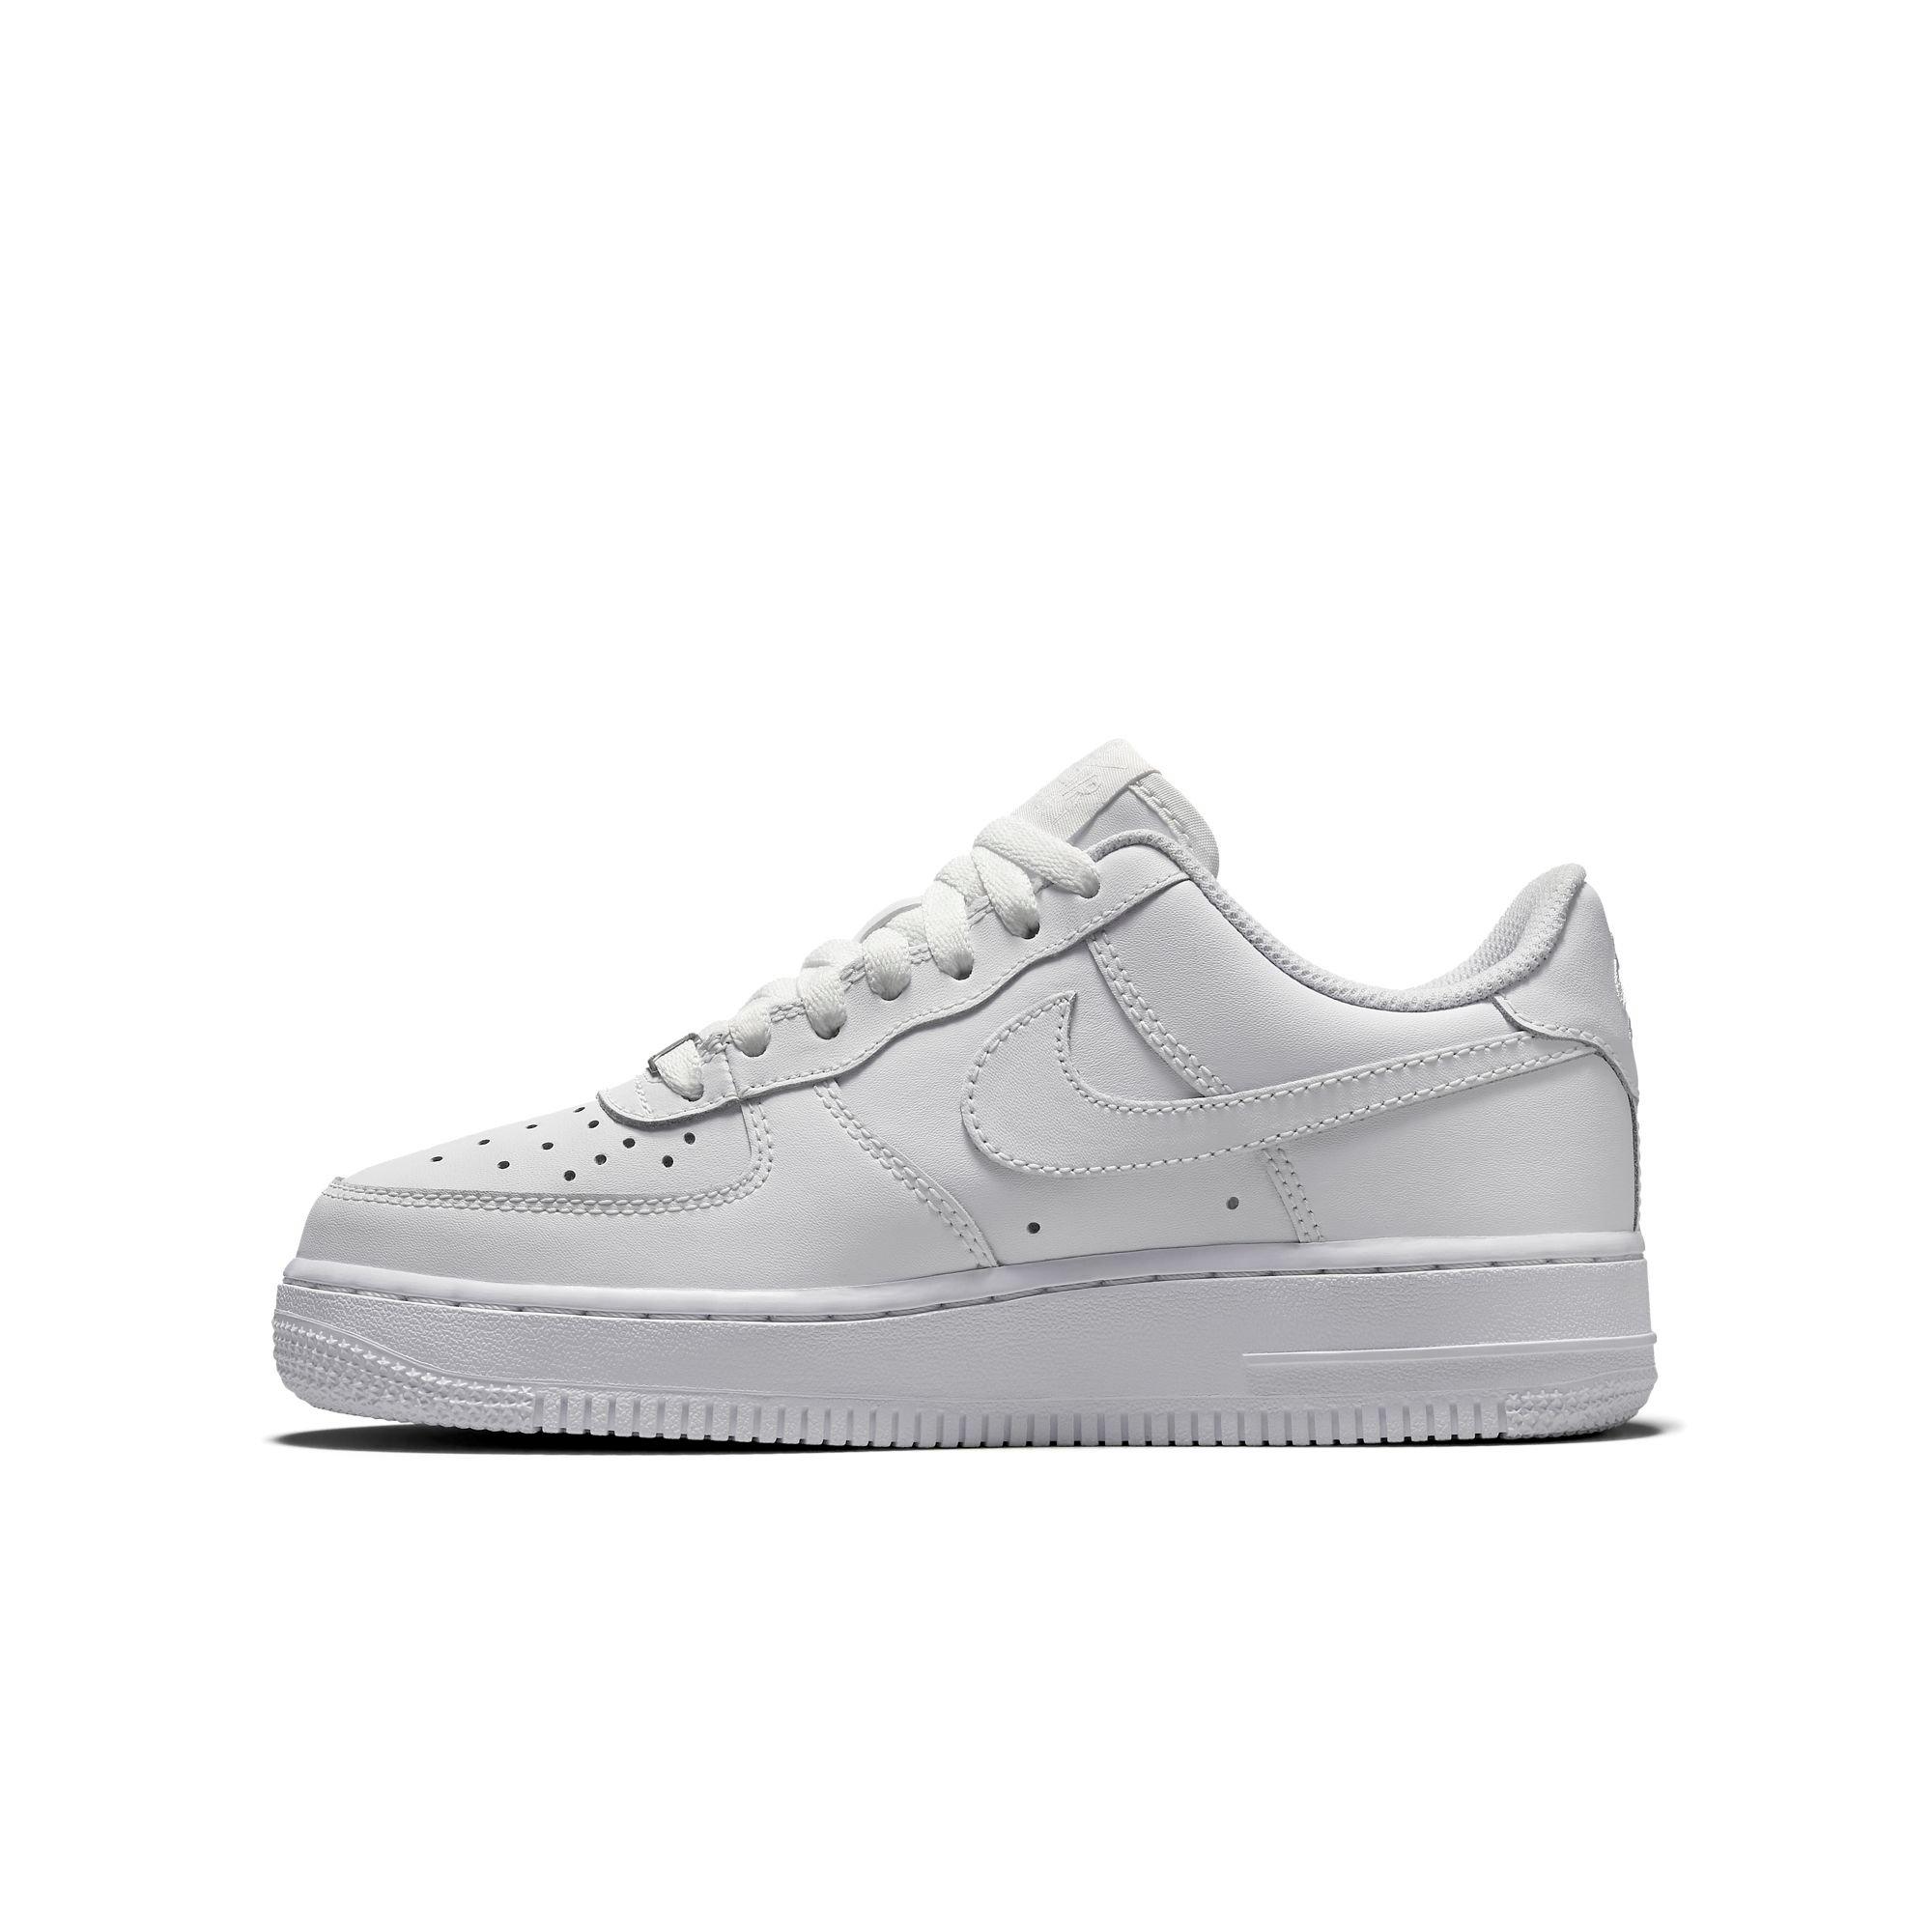 air force 1 low grade school white